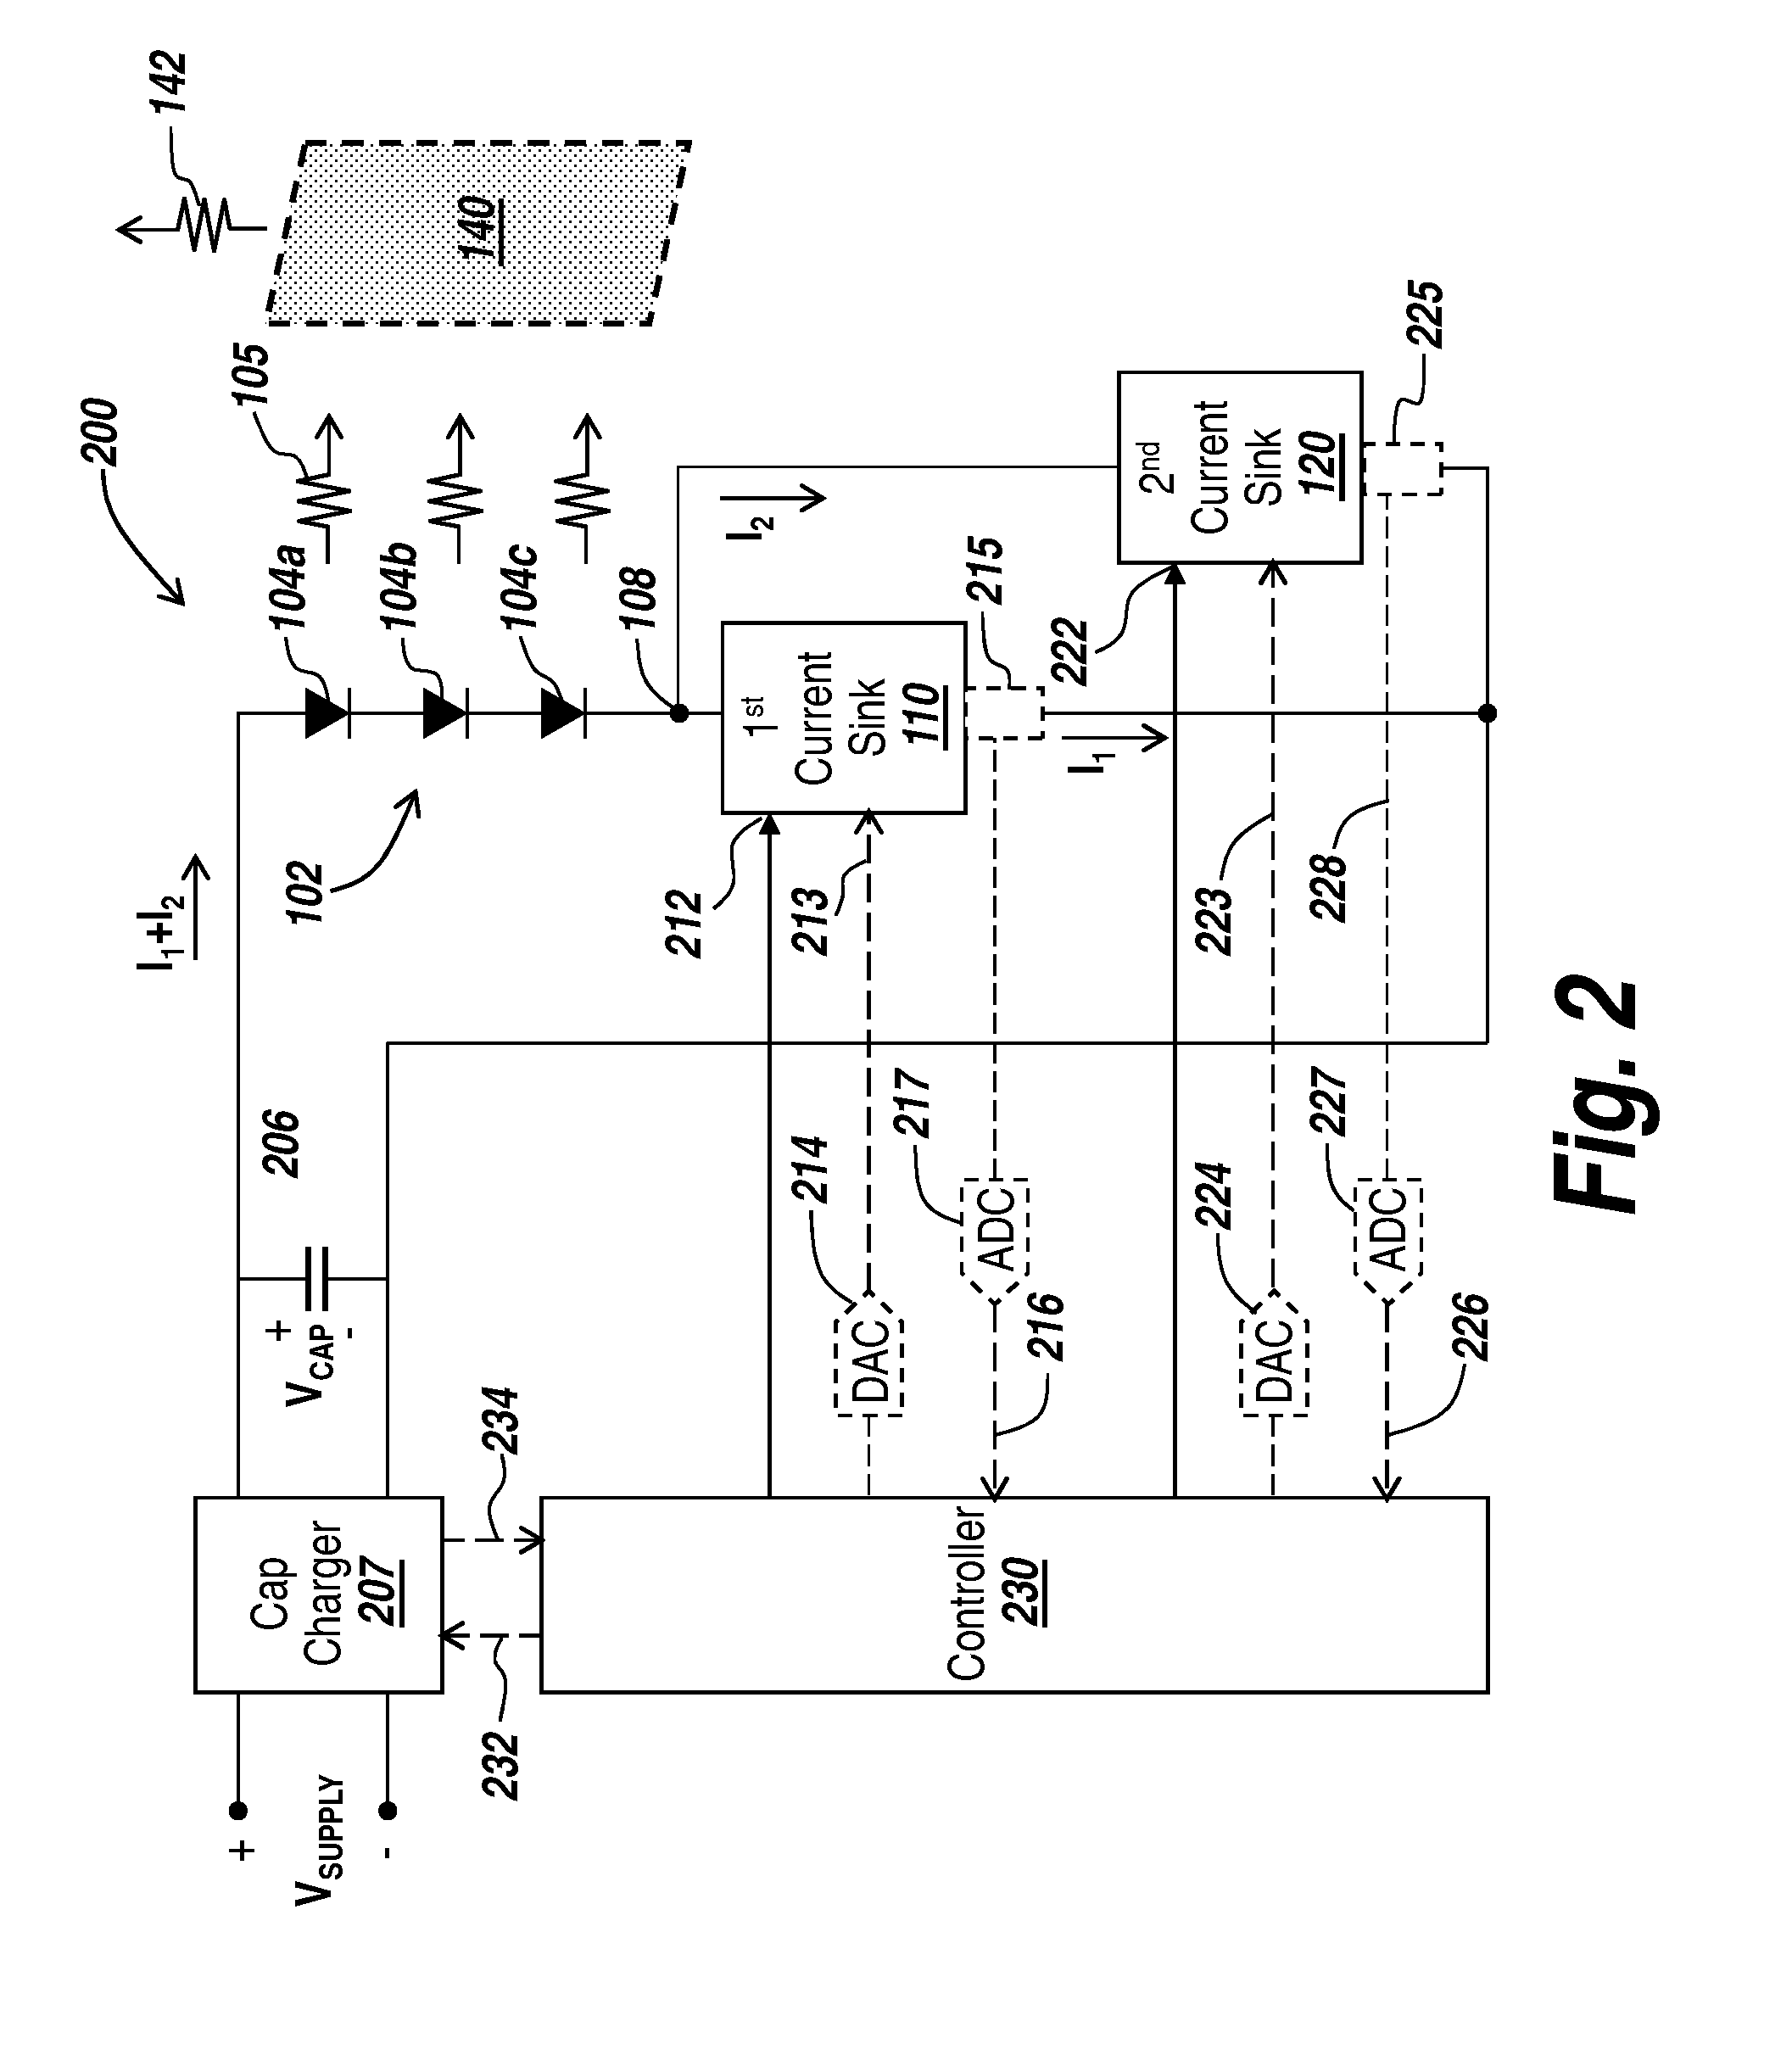 Diode driver for battery operated laser systems